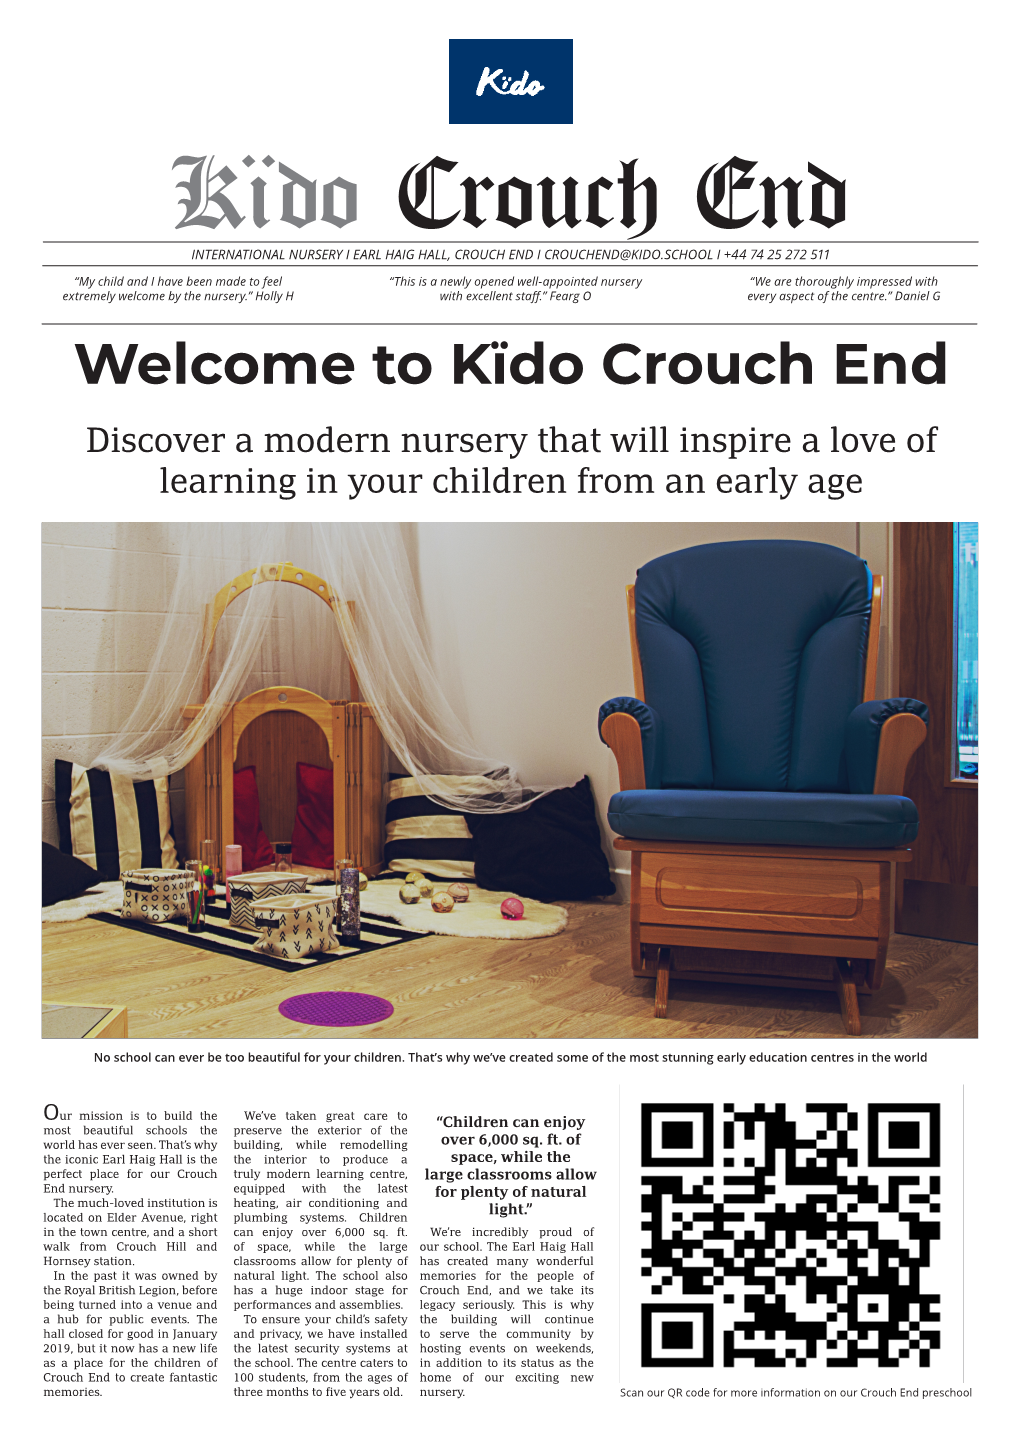 Welcome to Kïdo Crouch End Discover a Modern Nursery That Will Inspire a Love of Learning in Your Children from an Early Age